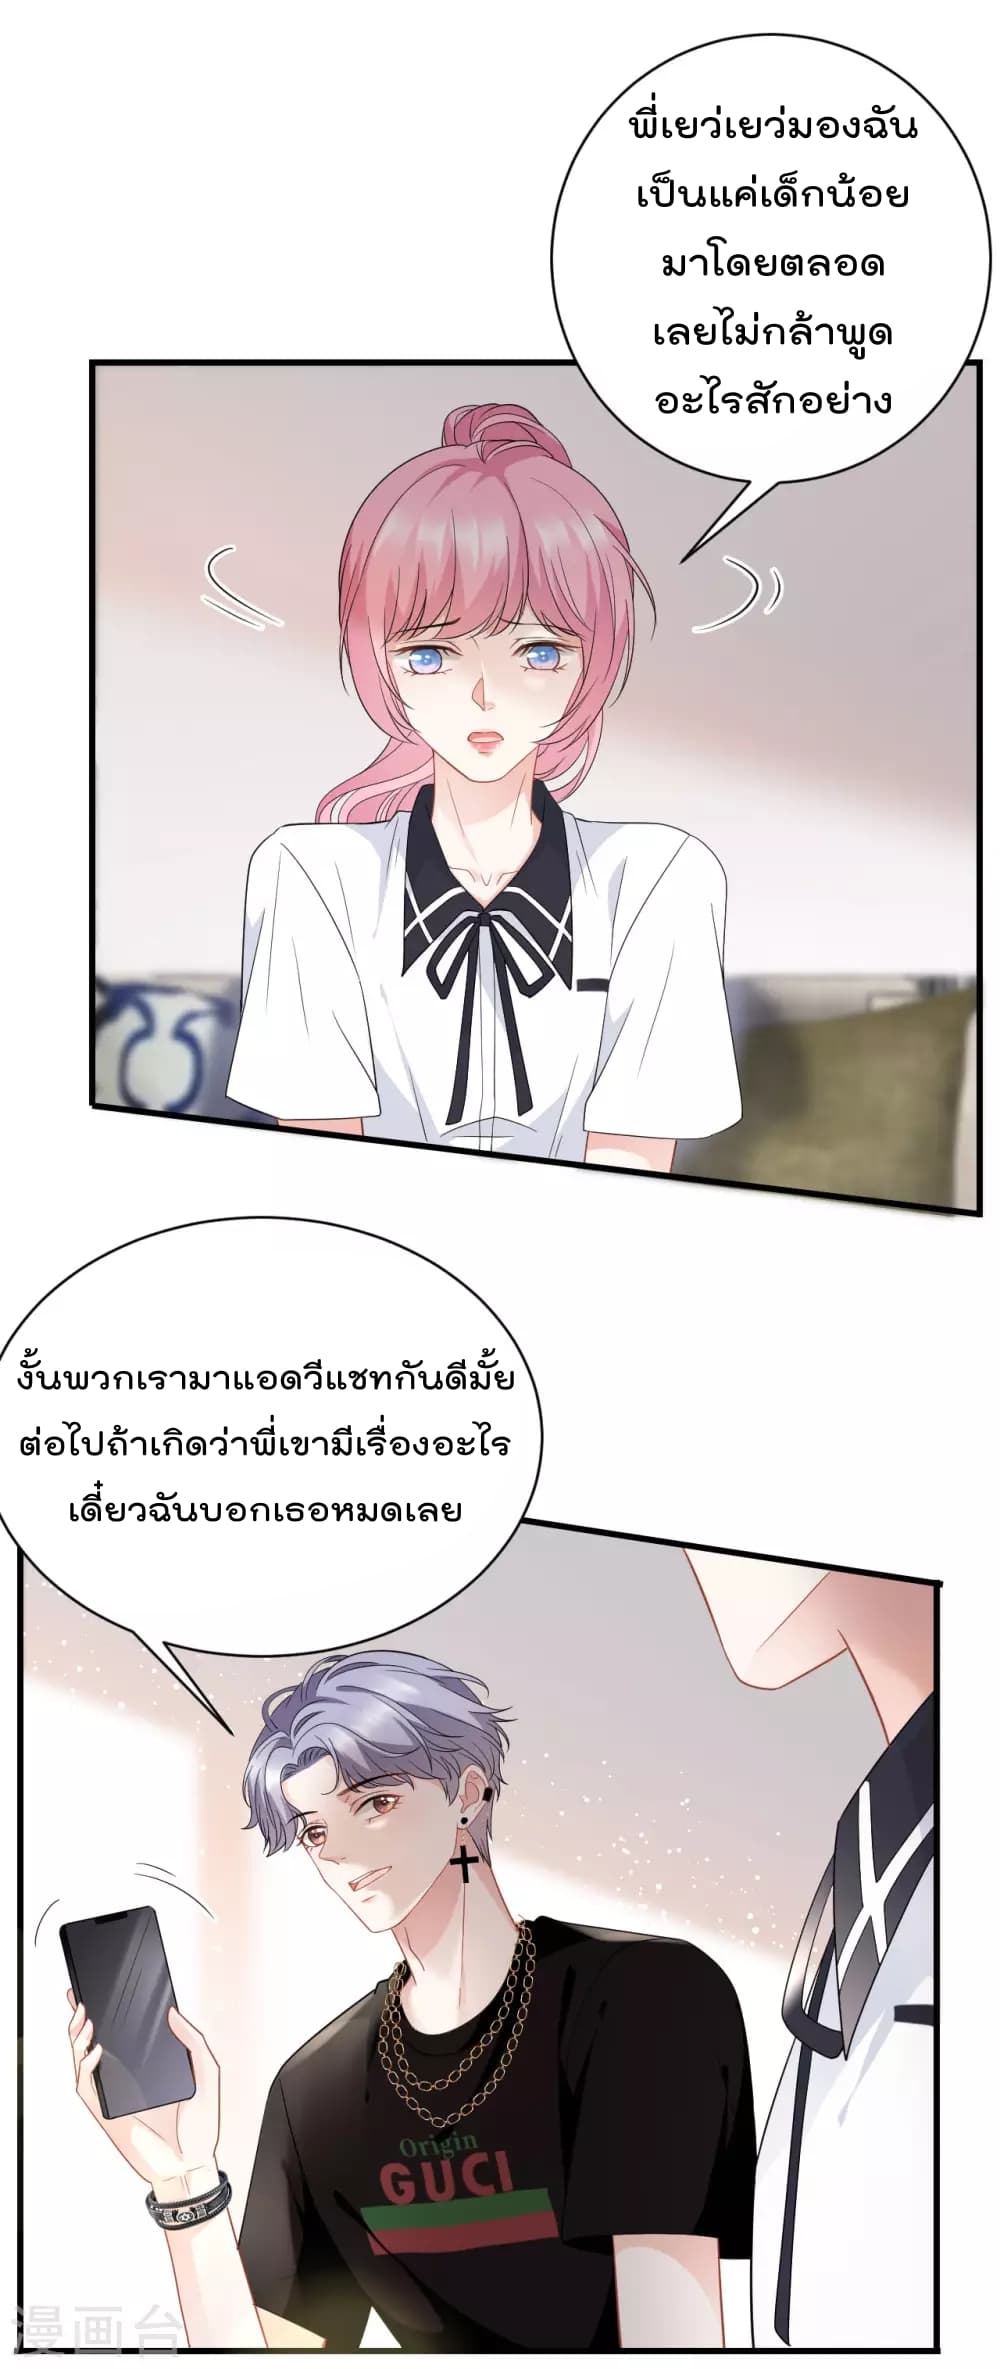 What Can the Eldest Lady Have คุณหนูใหญ่ ทำไมคุณร้ายอย่างนี้ 37-37